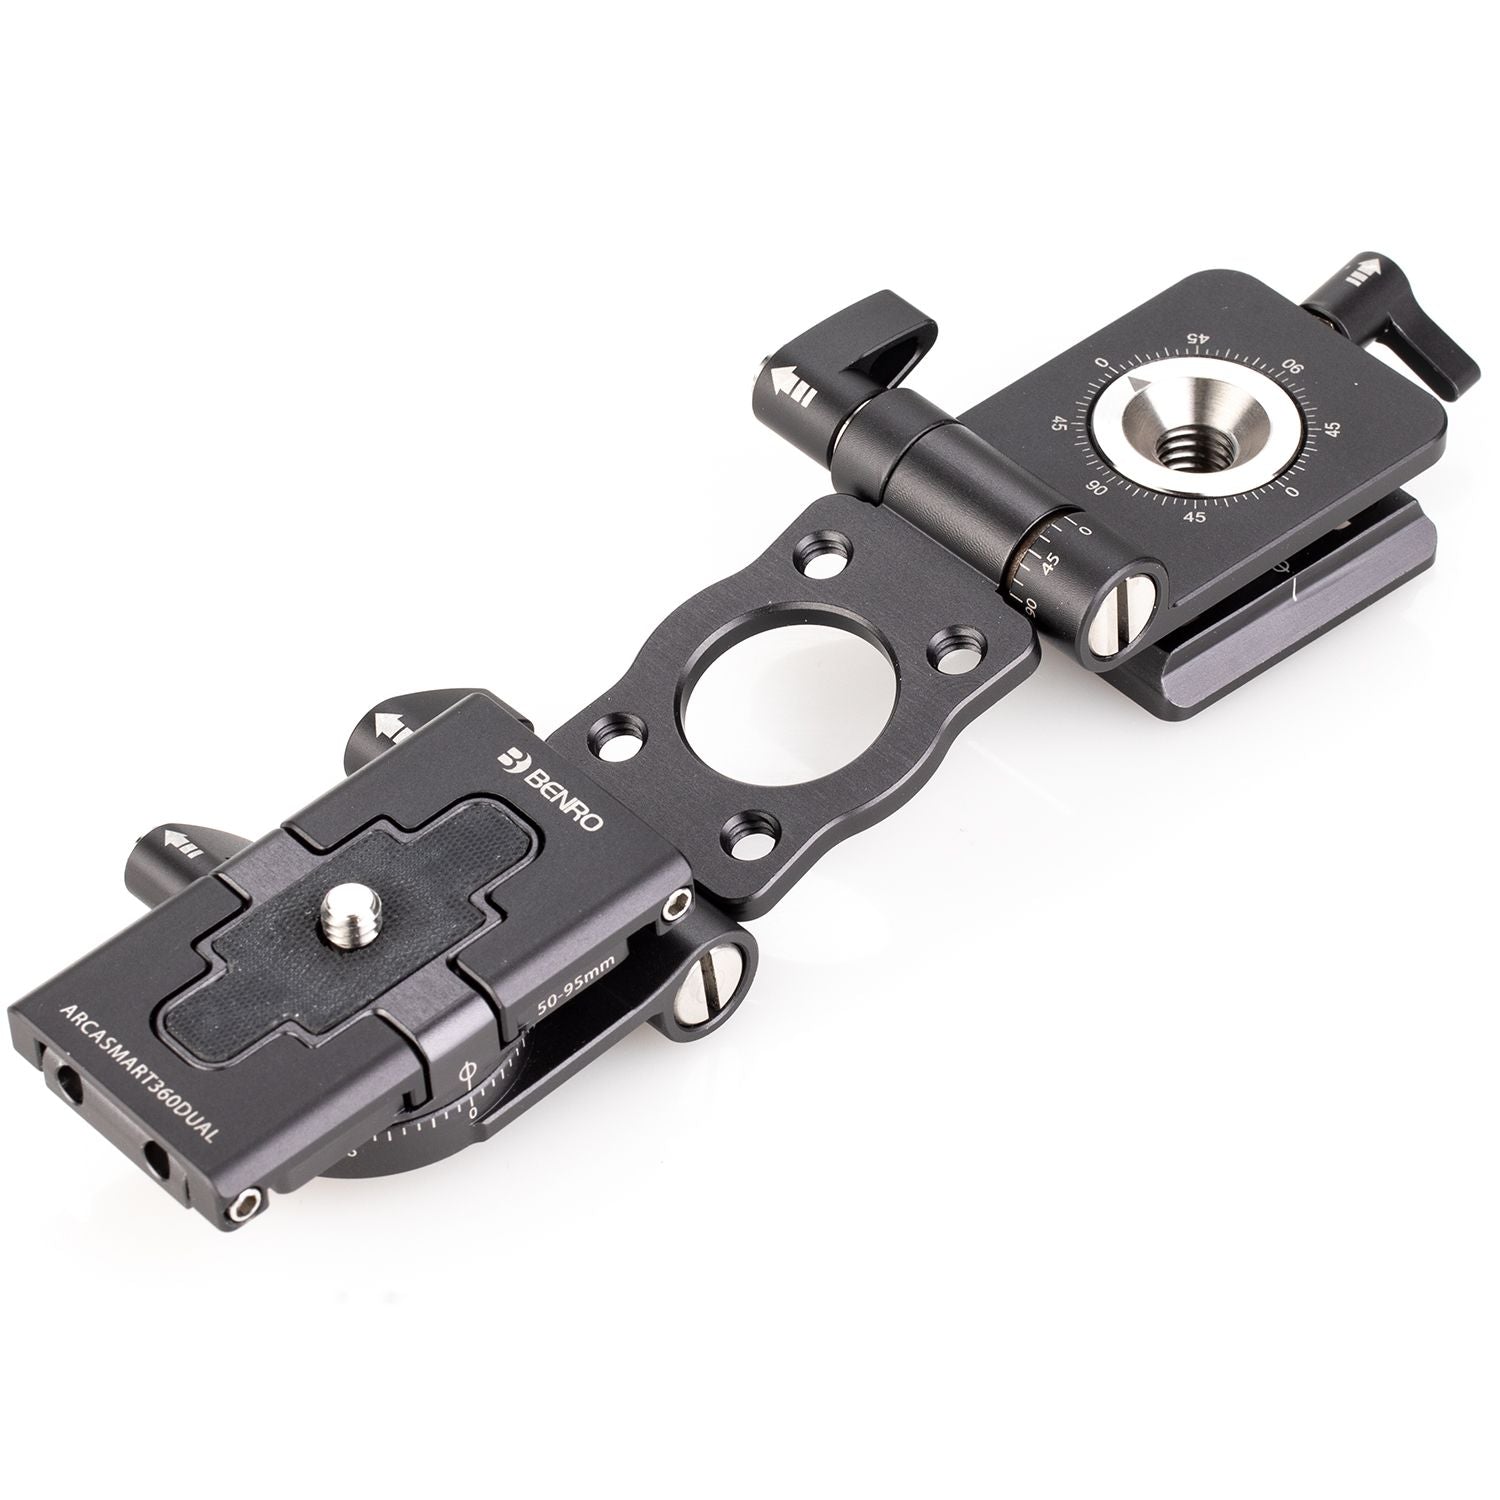 Benro ArcaSmart 360 Dual Quick Release Plate